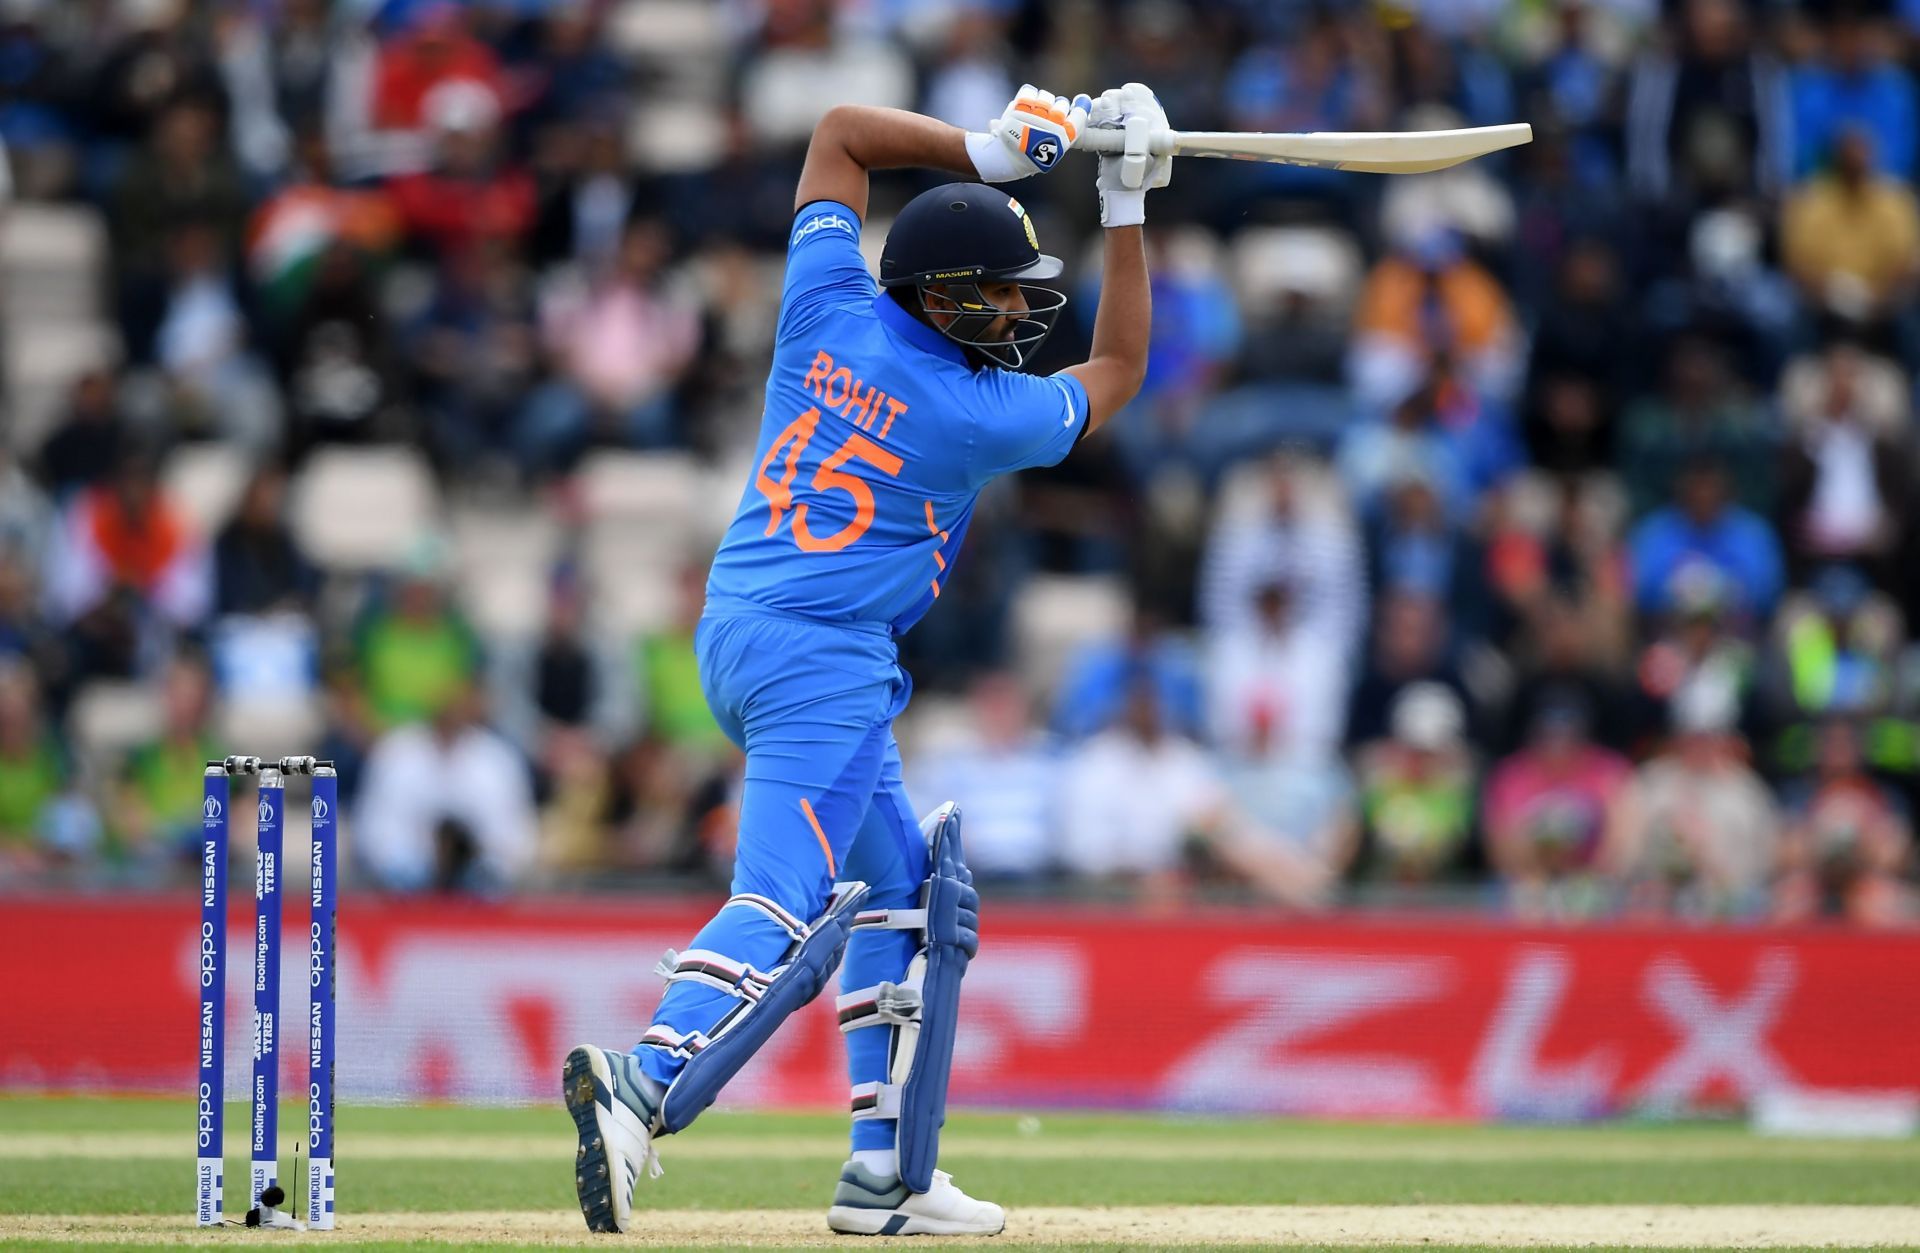 Rohit Sharma during the group stage match of the ICC Cricket World Cup 2019 between South Africa and India at The Hampshire Bowl in Southampton. Pic: Getty Images